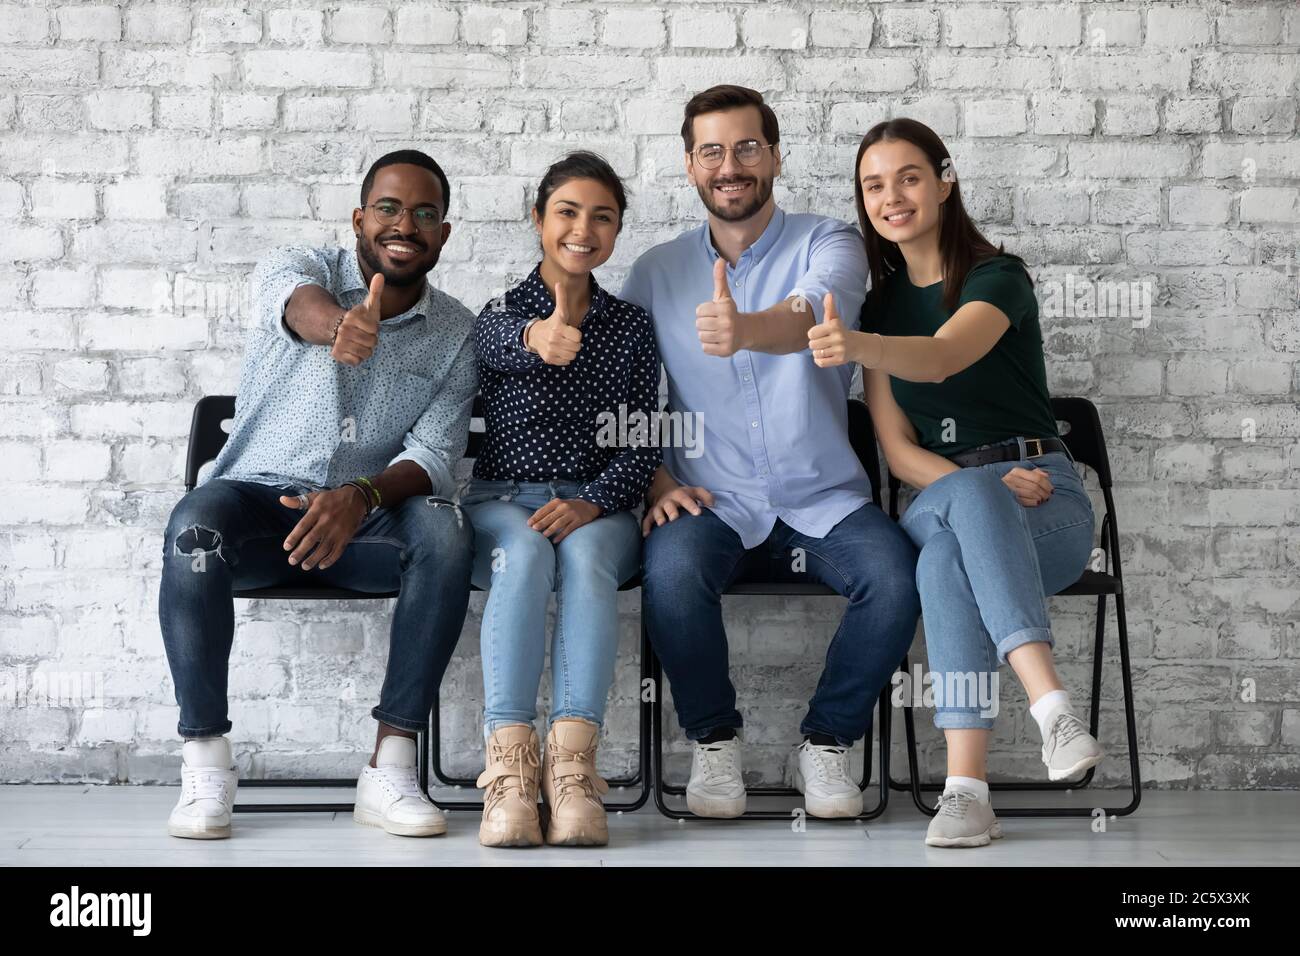 Applicants passed job interview getting position showing thumbs up Stock Photo